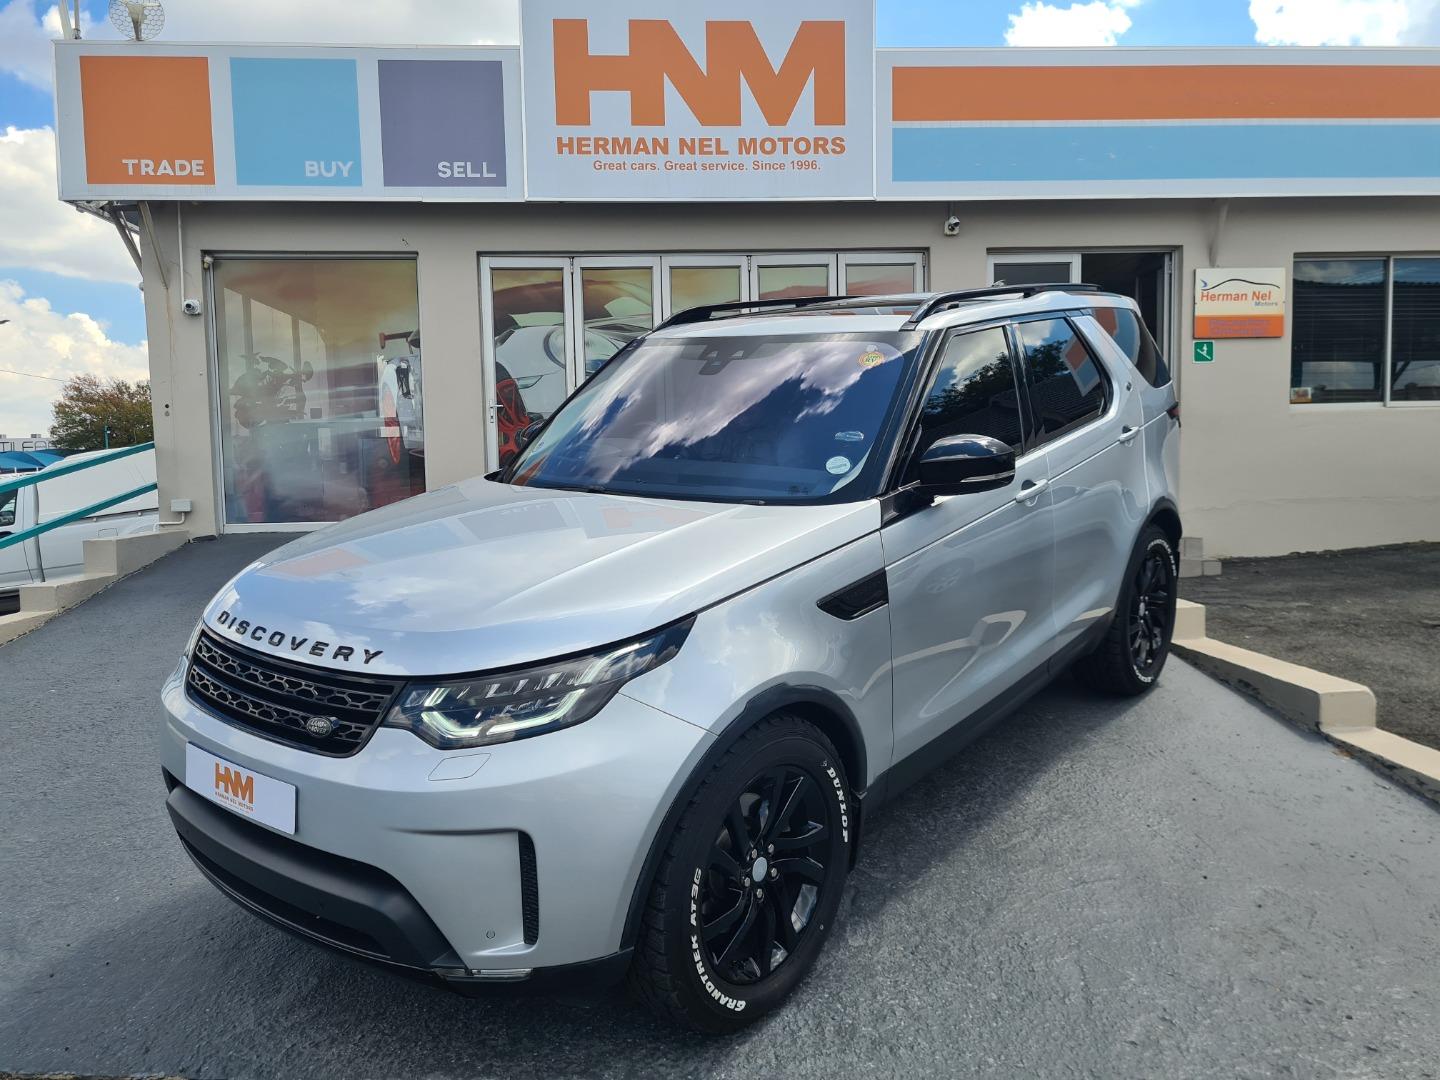 2017 LAND ROVER DISCOVERY HSE LUXURY TD6